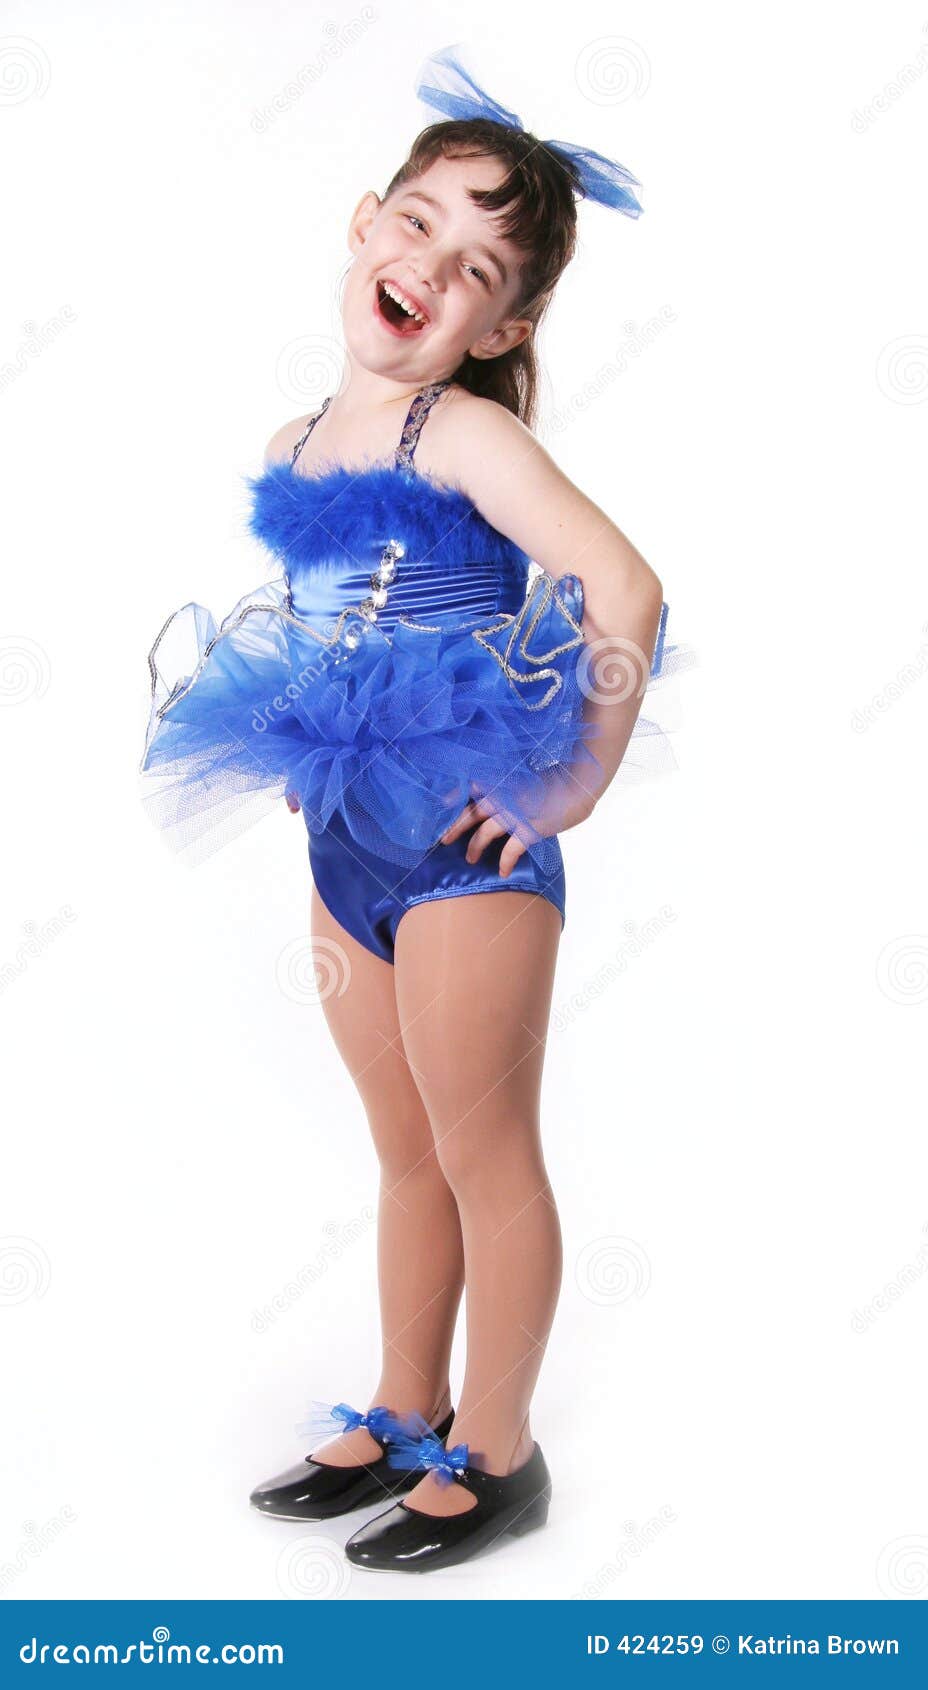 Girl Dancer Doing Different Movements Of Dance In Bathing Suit For Dancing And Ballet Shoes